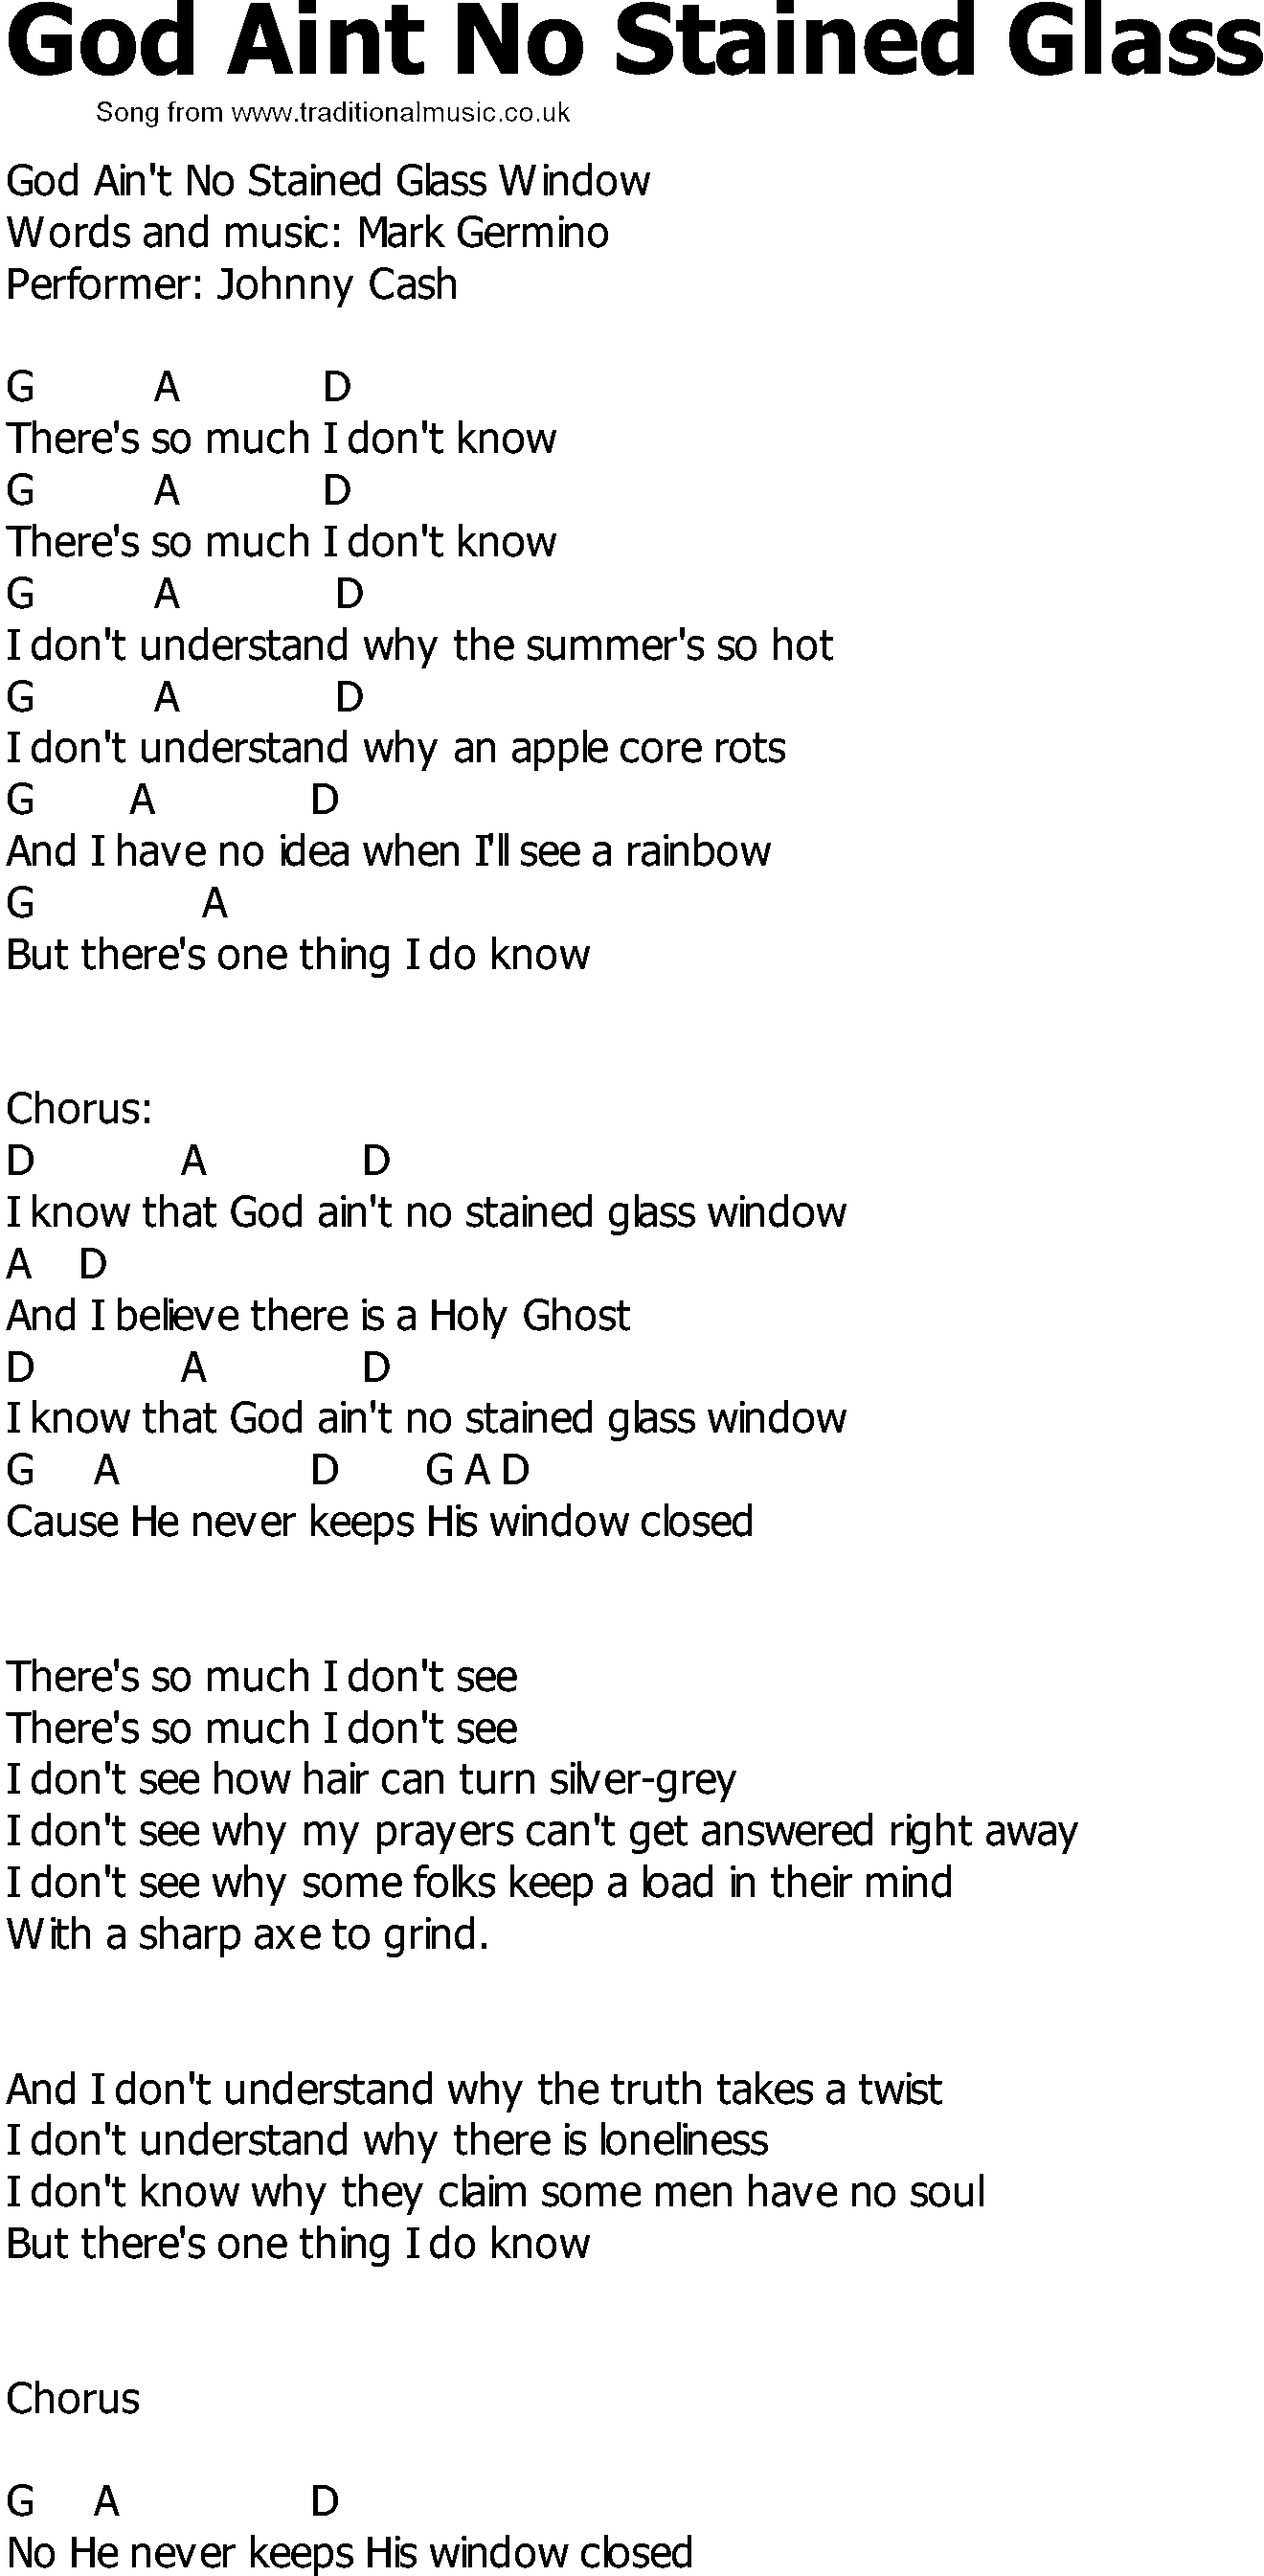 Old Country song lyrics with chords - God Aint No Stained Glass